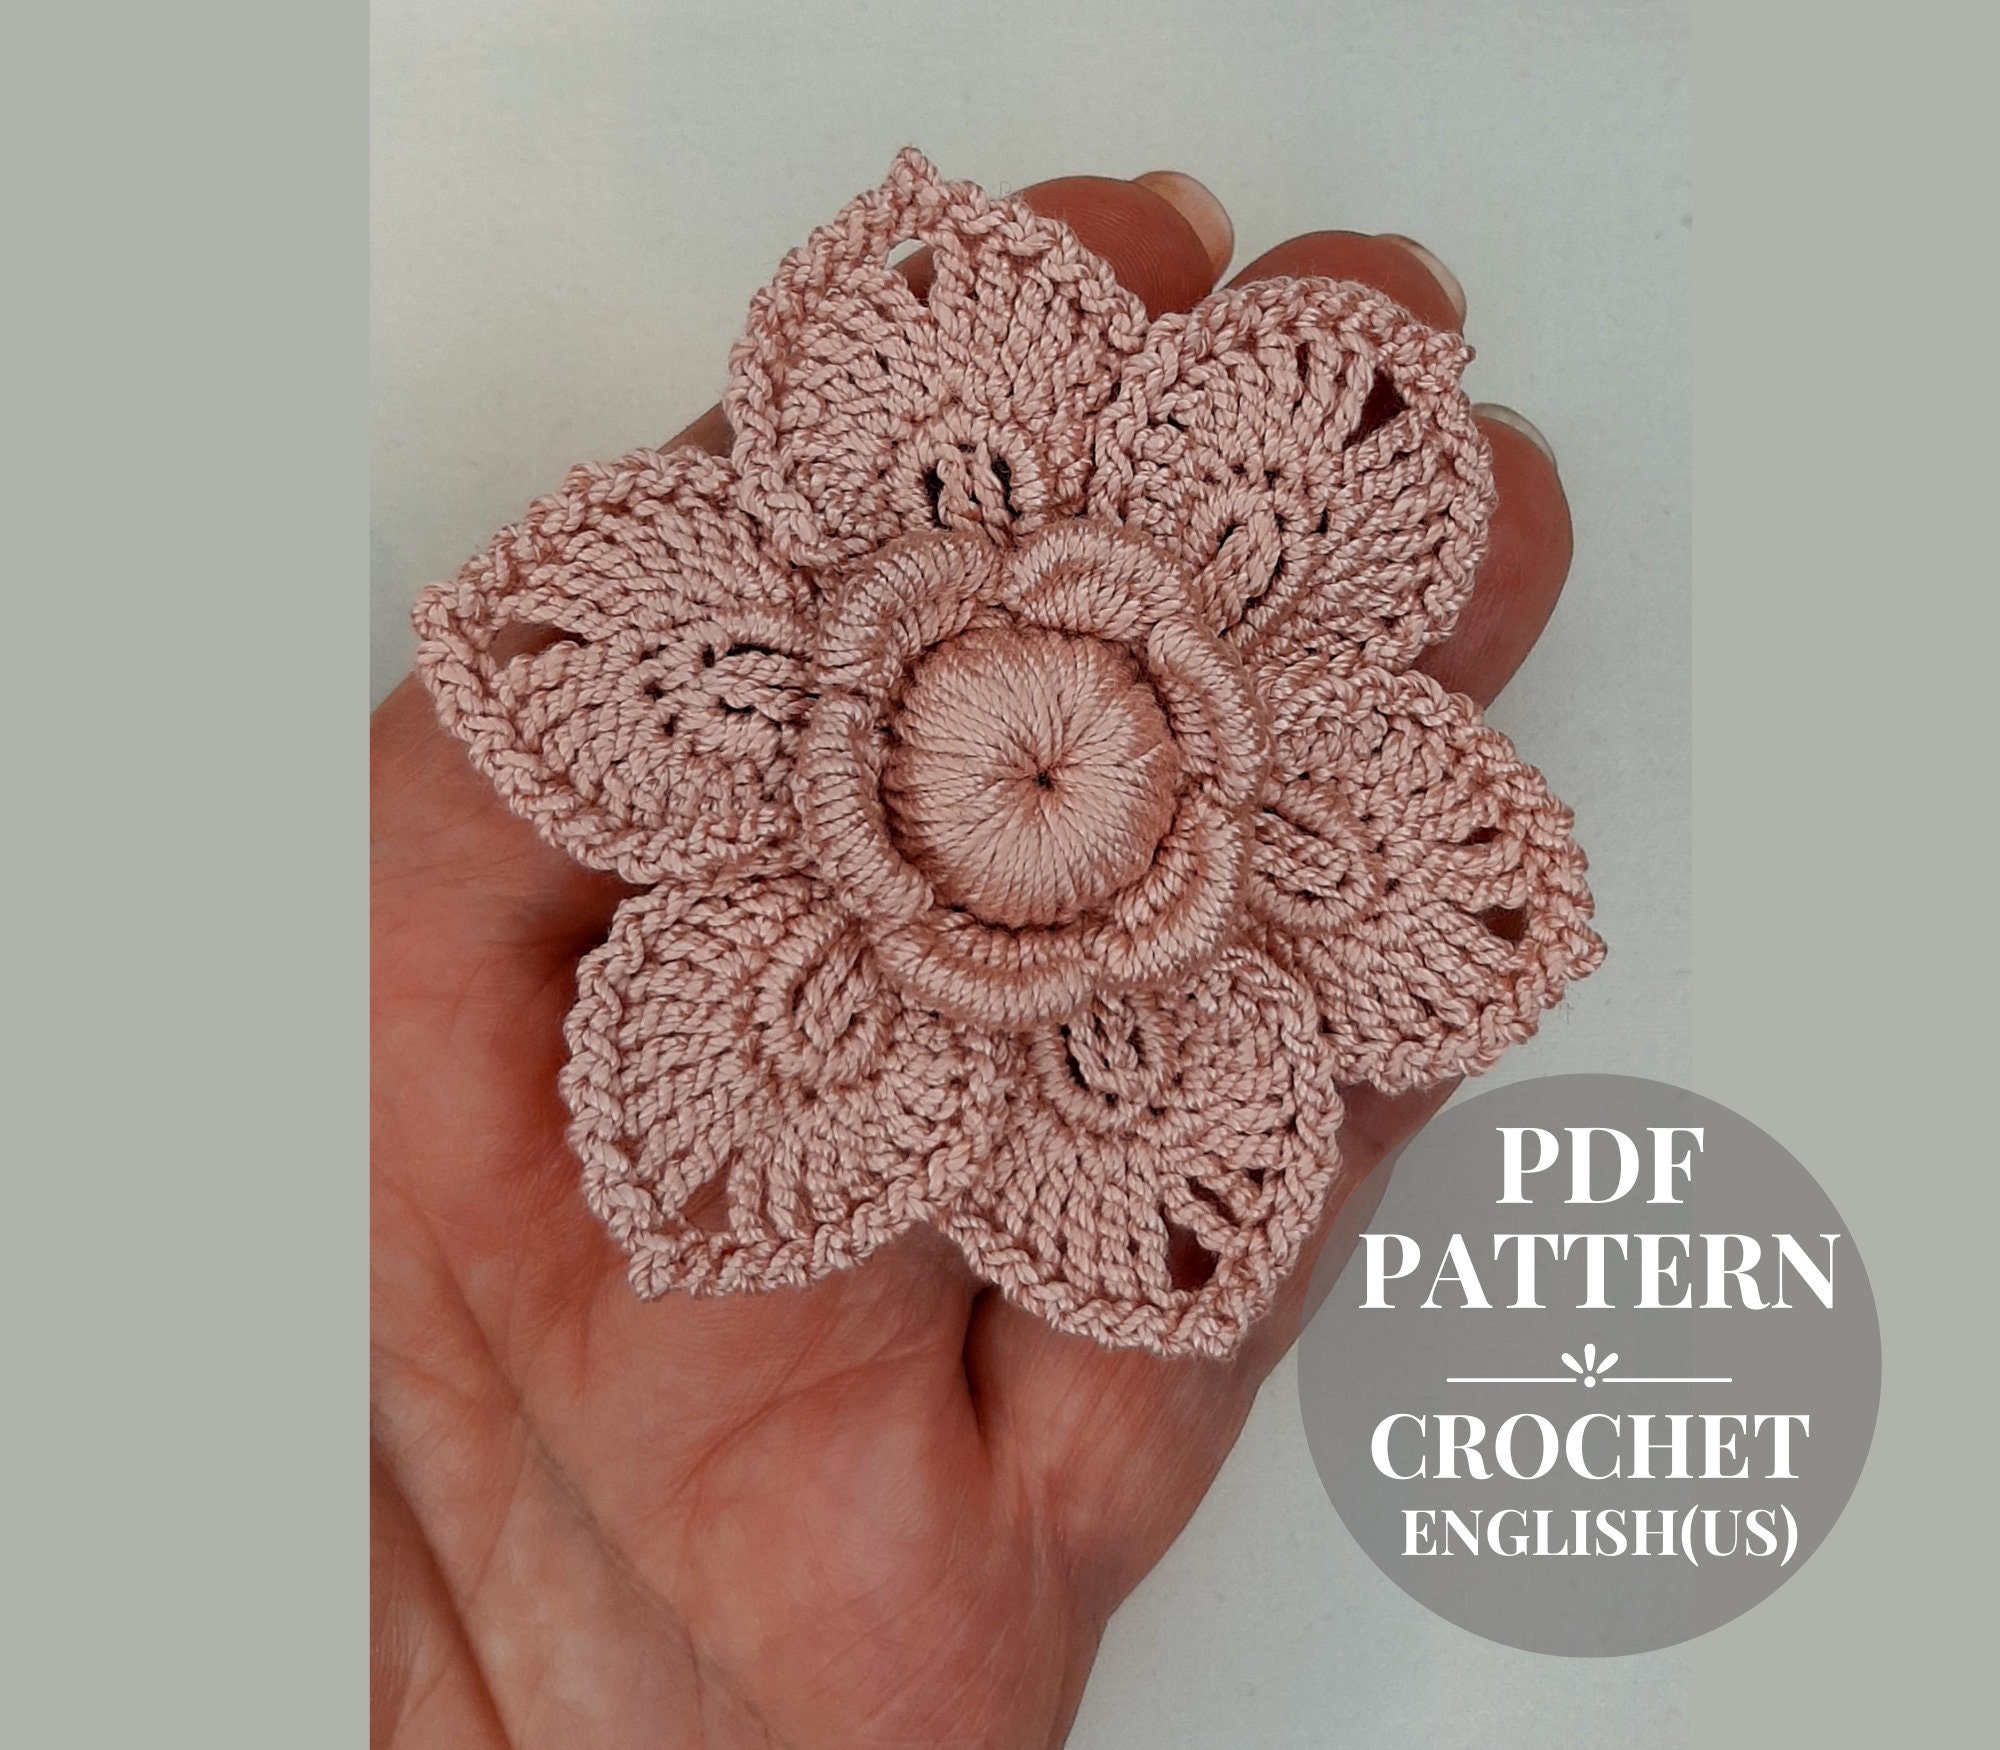 Crochet Floral Lace Pattern: Free Crochet Pattern and Tutorial